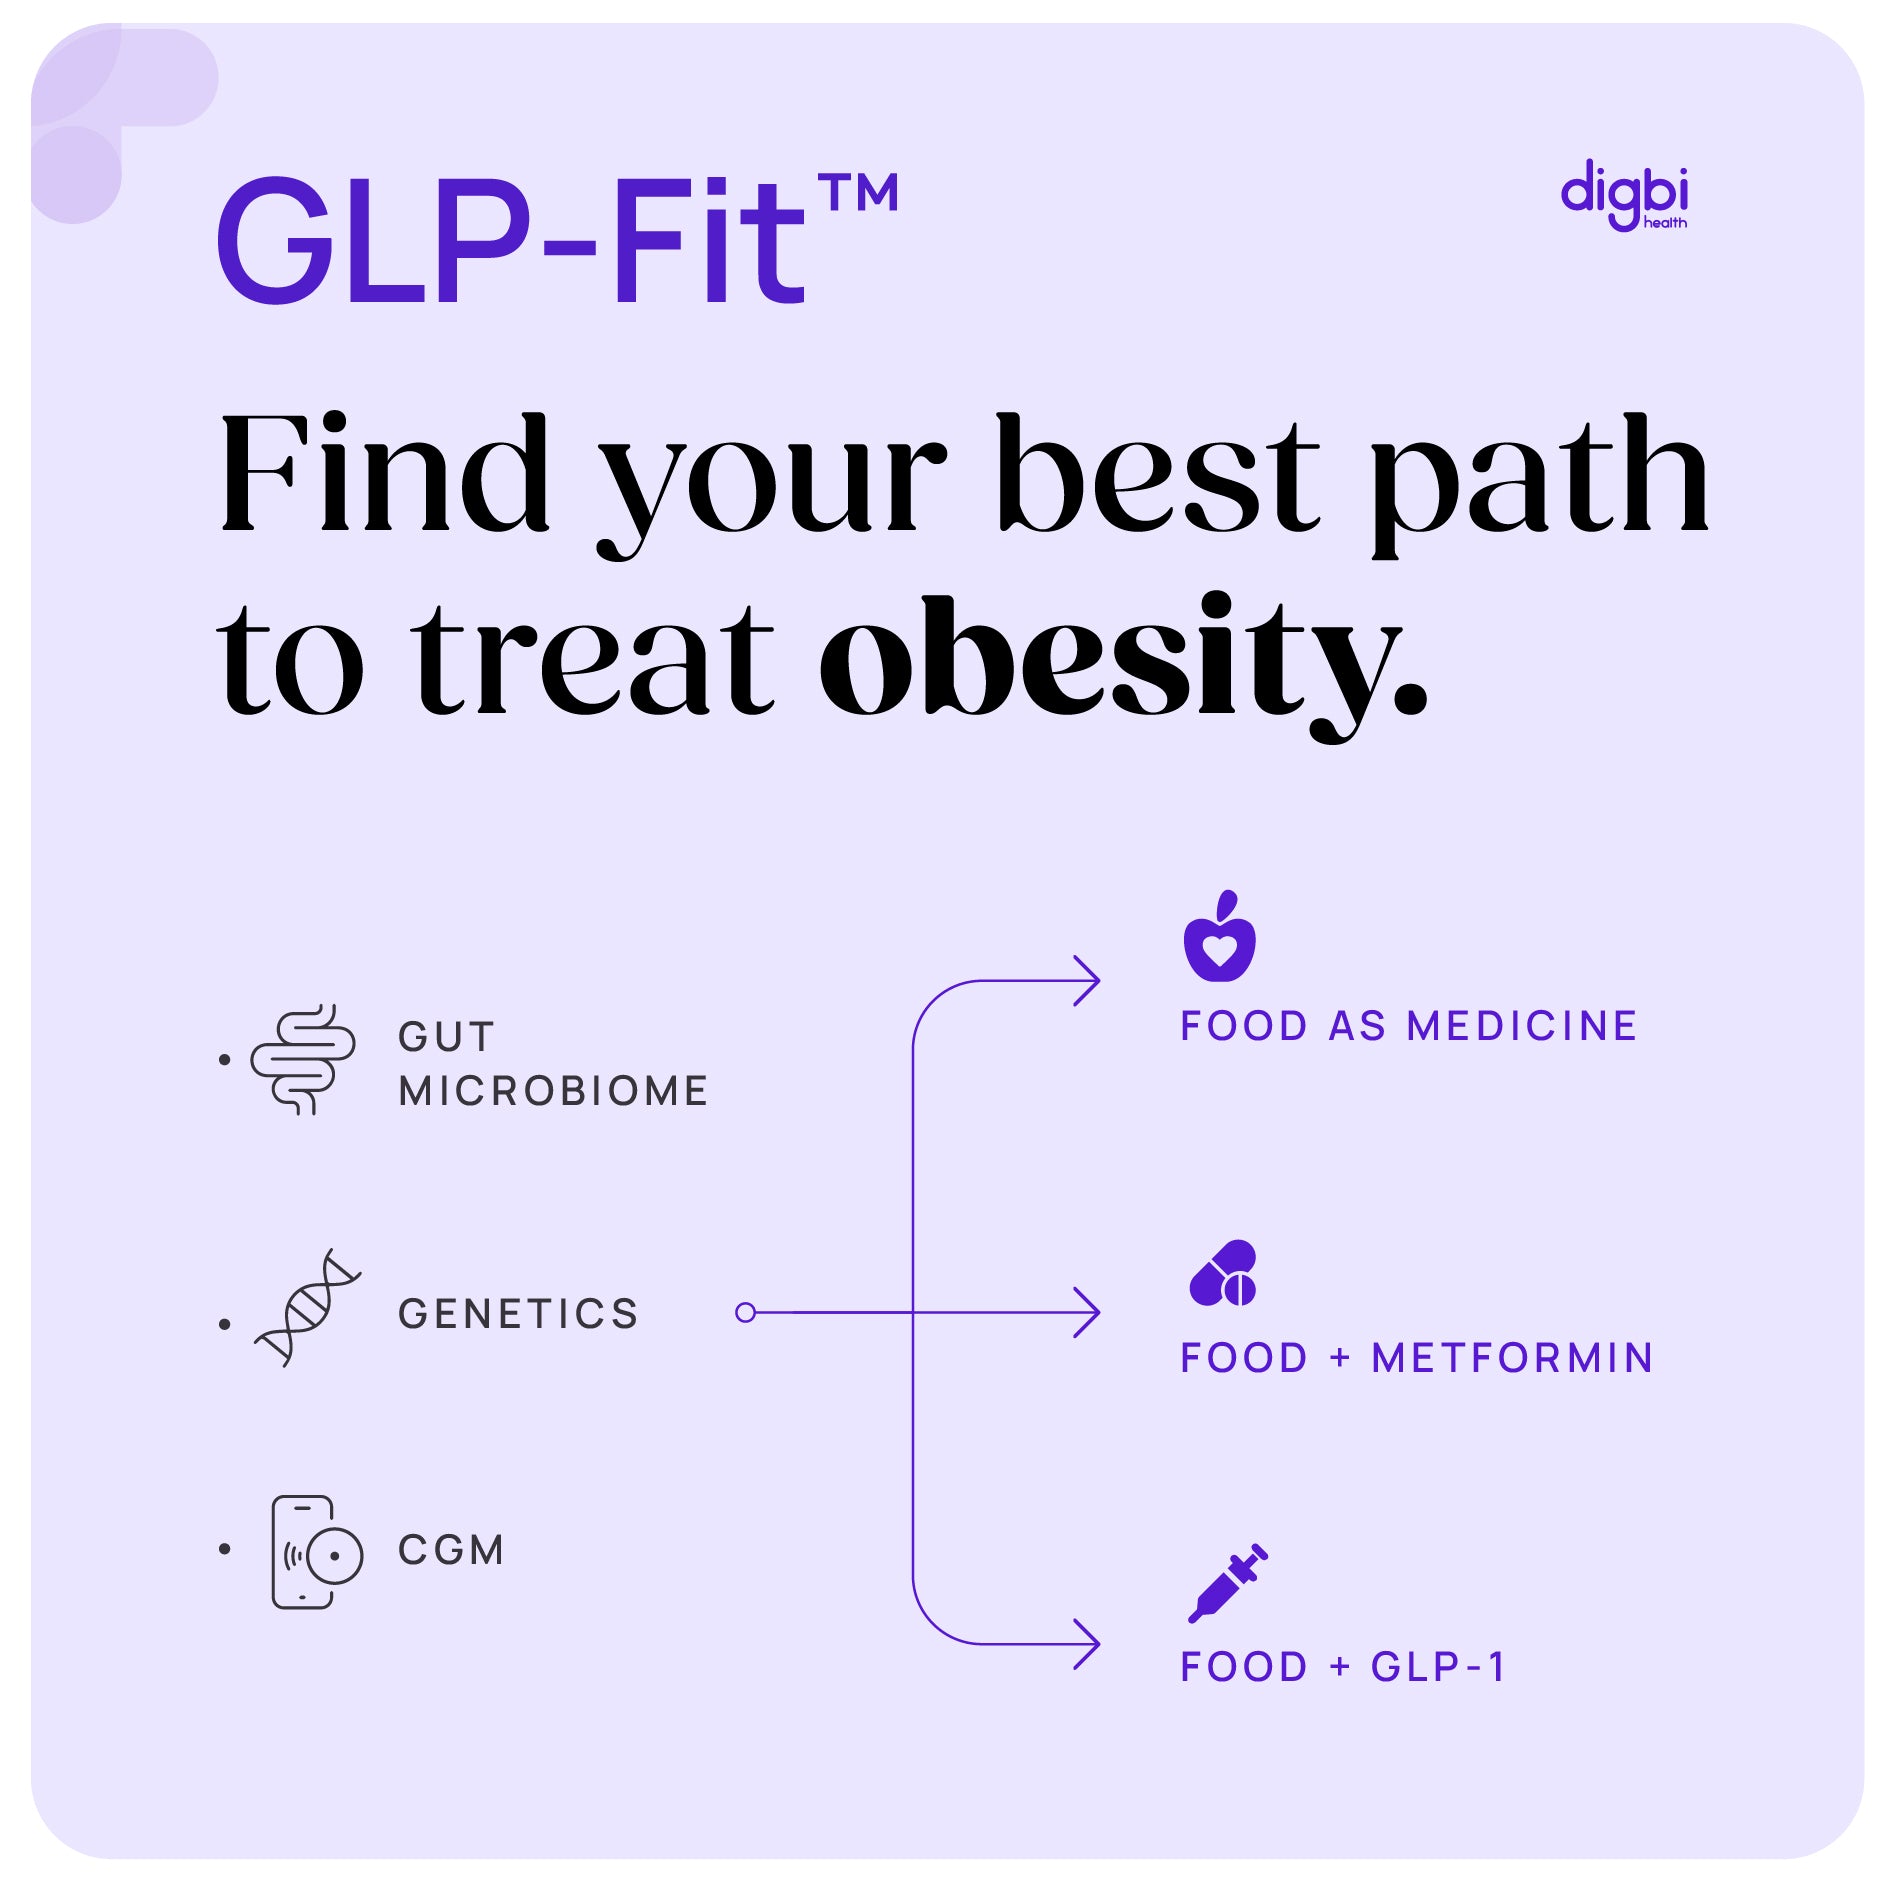 Digbi Health Launches GLP-Fit™ Program:  Expands its Precision Biology Platform to Incorporate GLP-1 based Personalized Care for Obesity